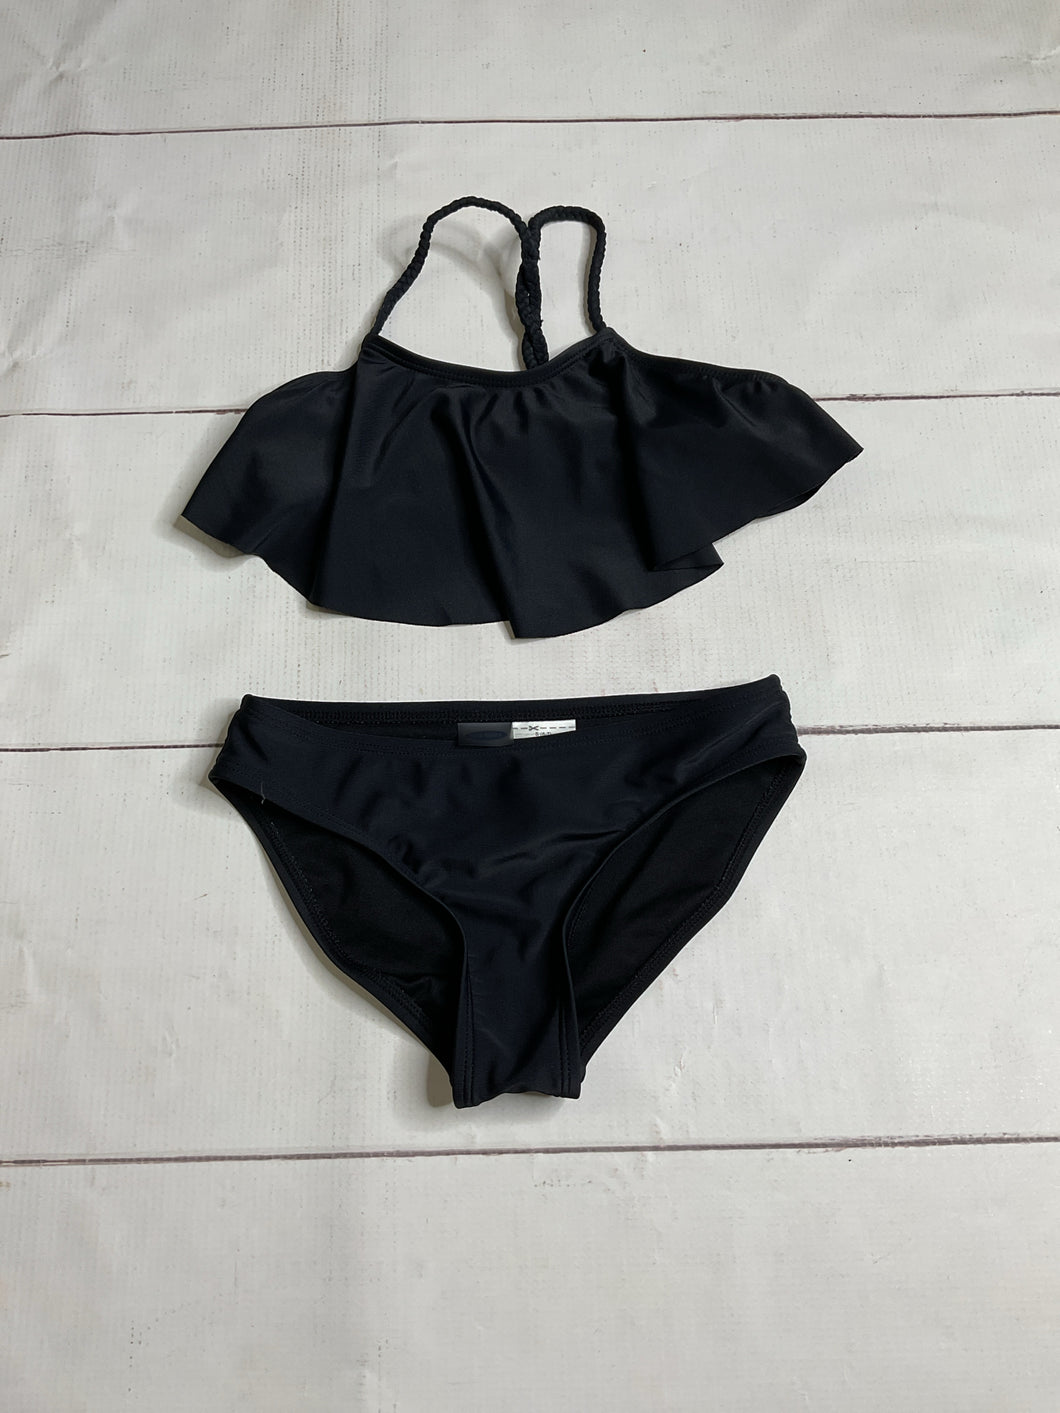 Old Navy Size 6/7 Swimsuit